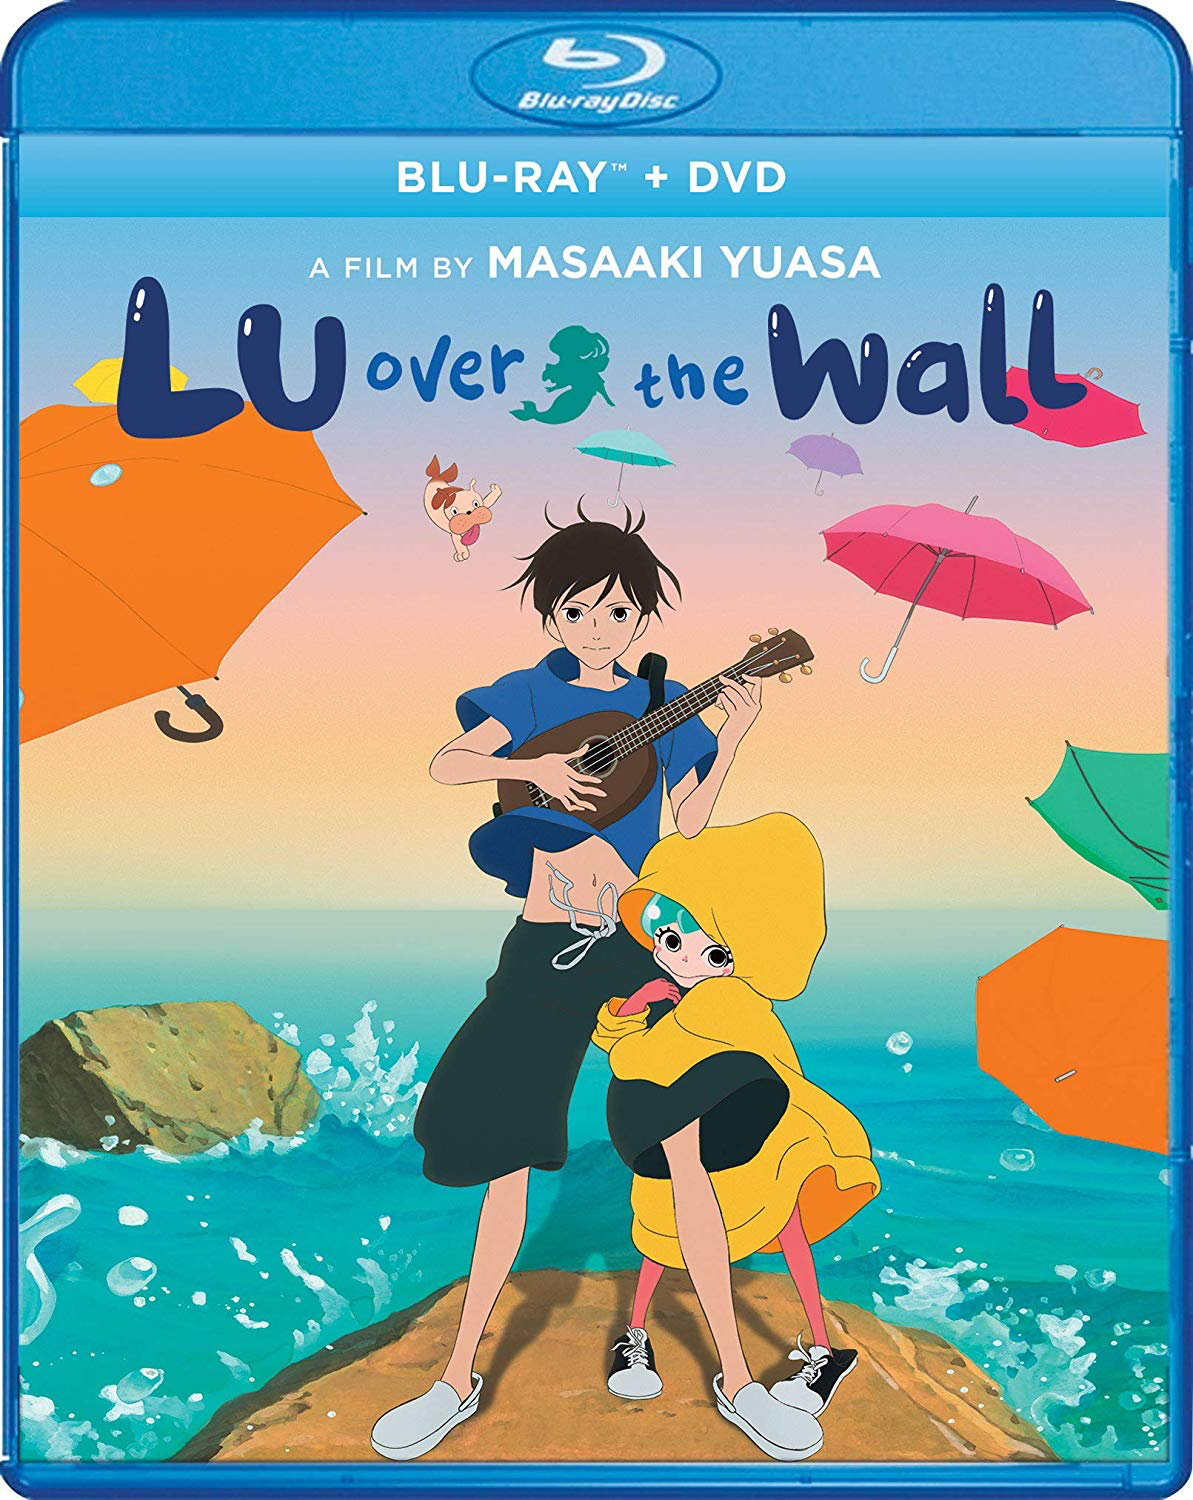 blu-ray and dvd covers: STUDIO GHIBLI + G-KIDS ANIMATION + THE WORKS OF